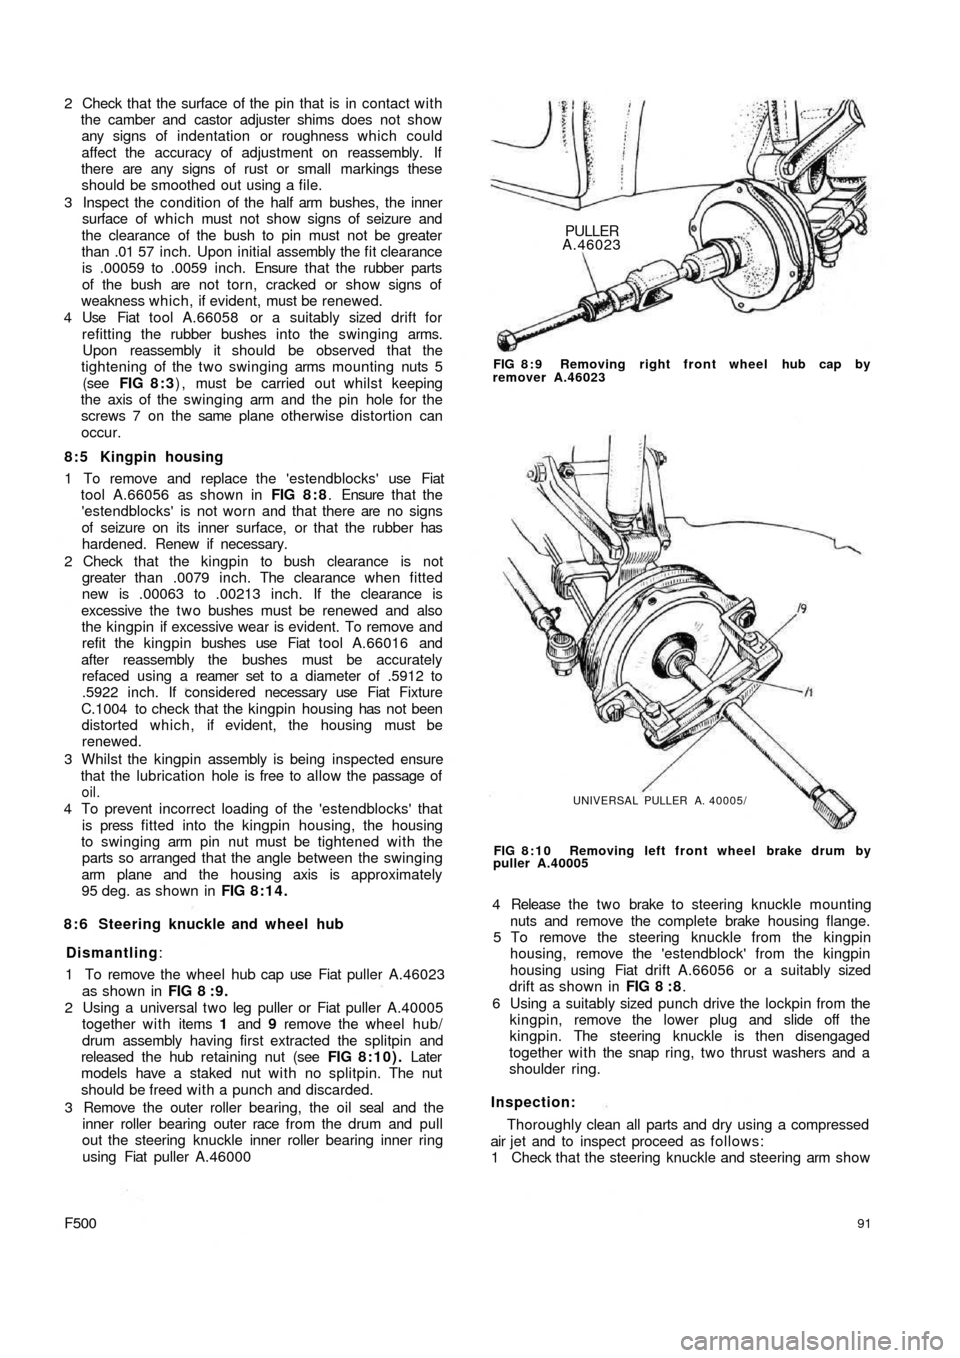 FIAT 500 1969 1.G Workshop Manual 2  Check that the surface of the pin that is in contact with
the camber and castor adjuster shims does not show
any signs of indentation or roughness which could
affect the  accuracy of adjustment on 